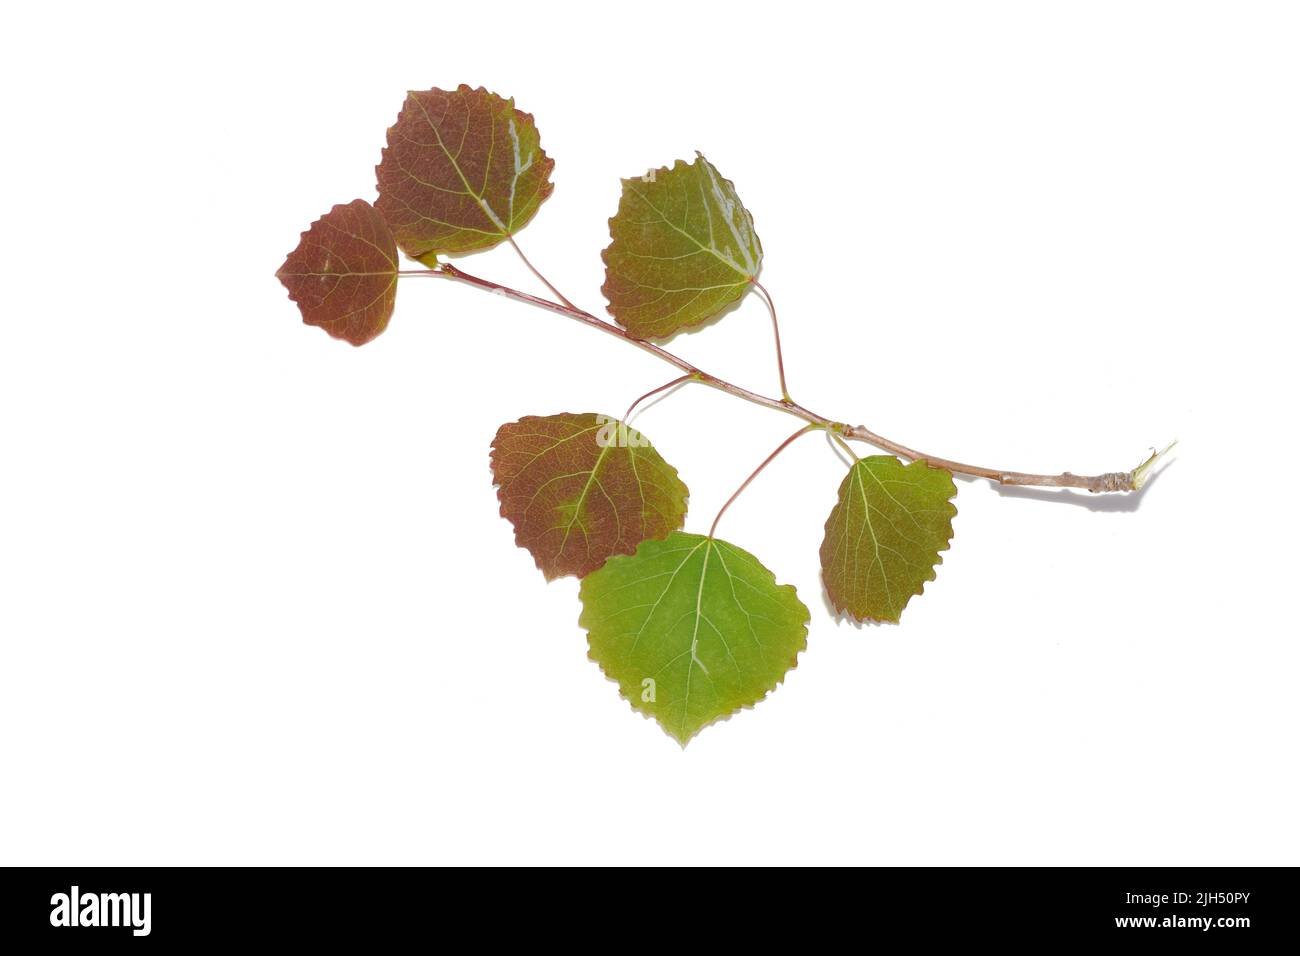 New young red and green leaves on common aspen tree Populus tremula in spring isolated on white background Stock Photo